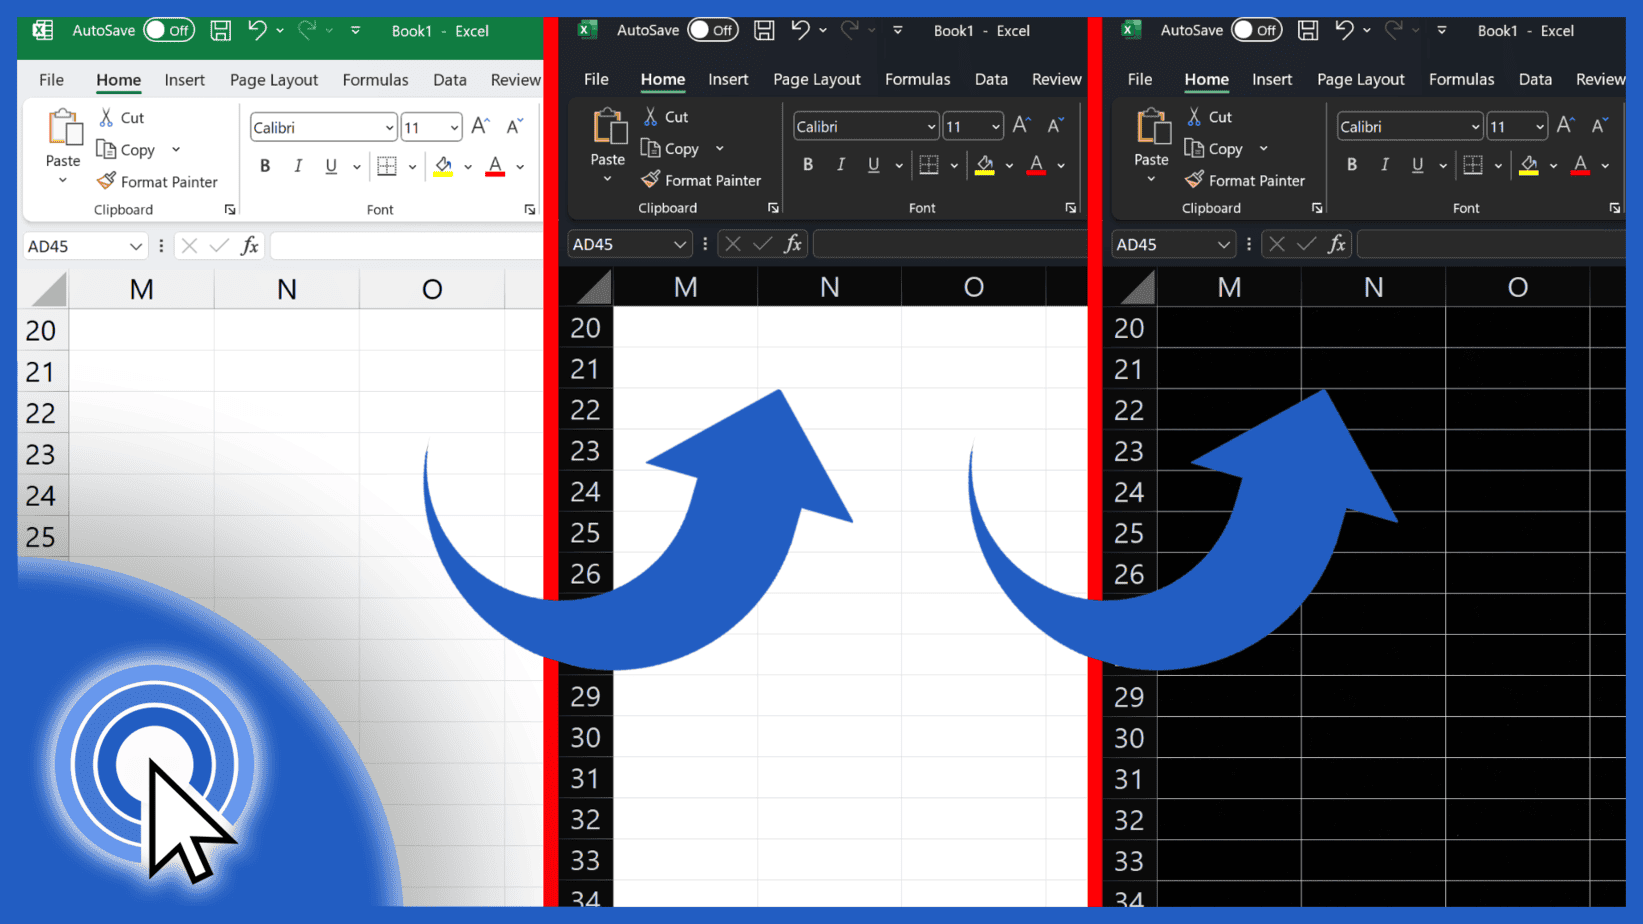 How to Enable Dark Mode in Excel